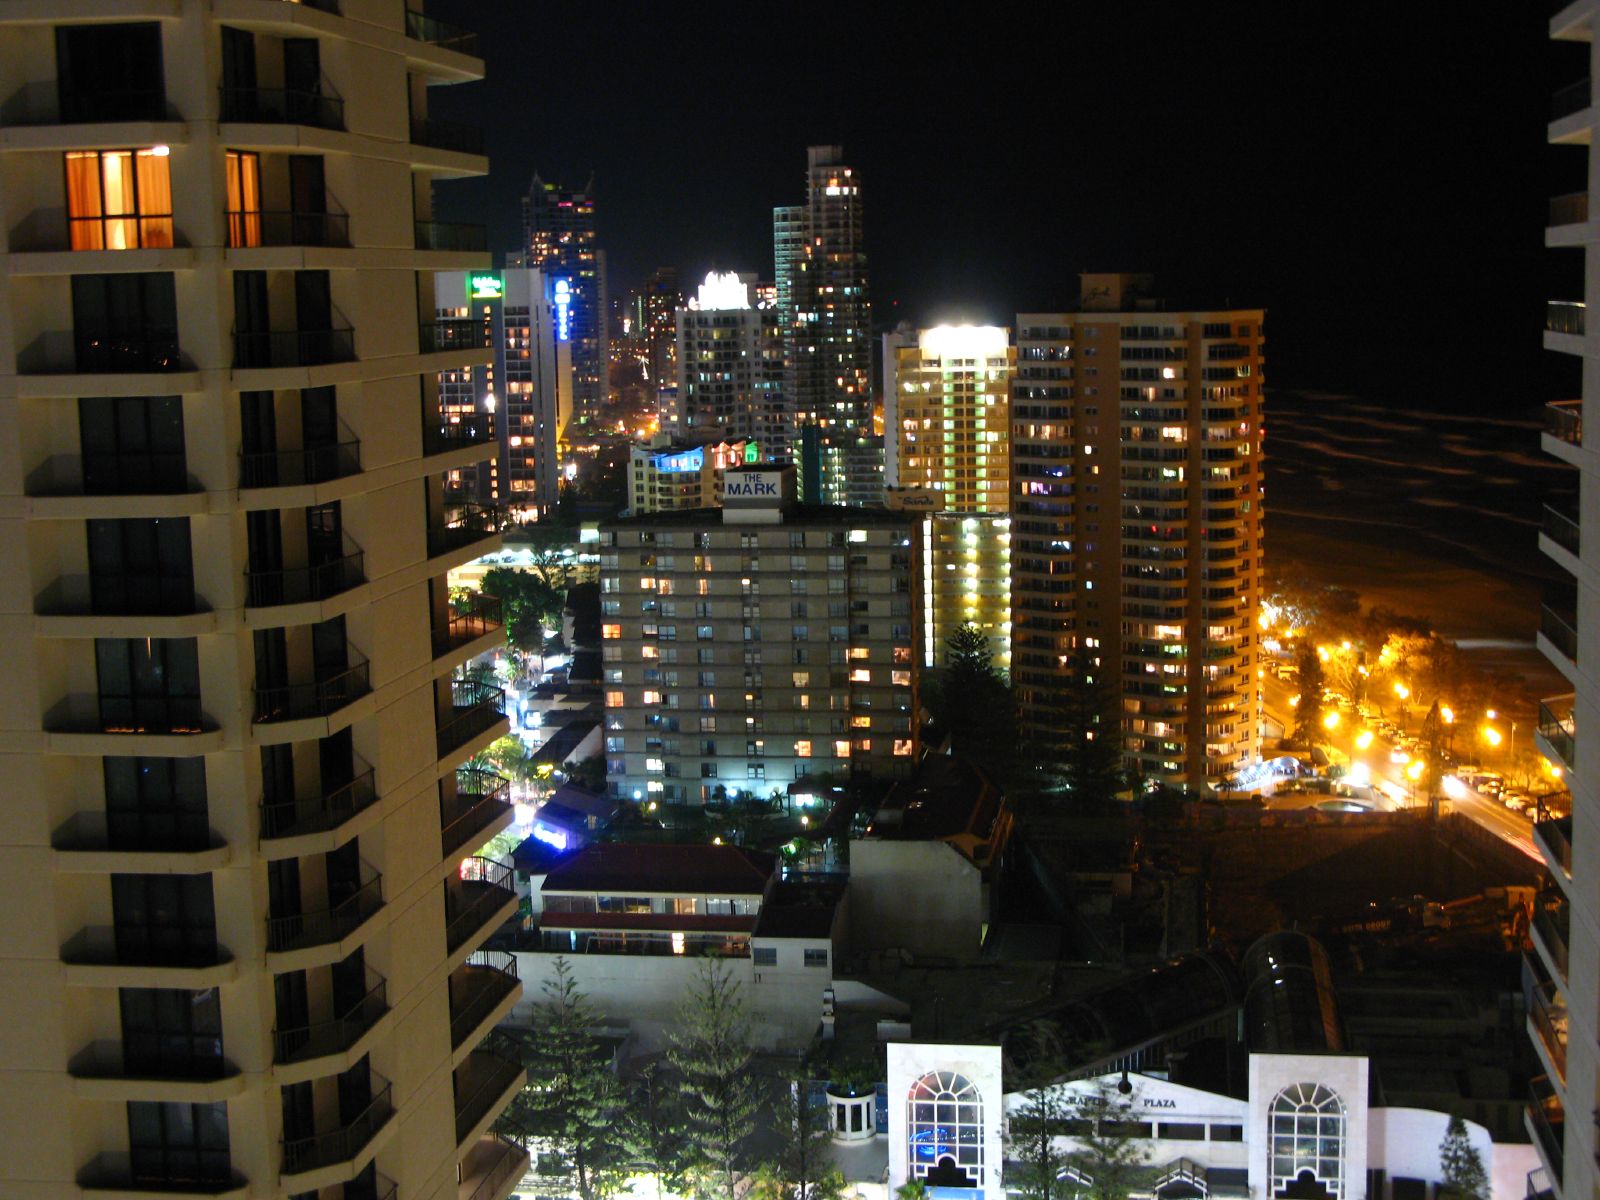 the night view of city buildings with skyscrs lit up